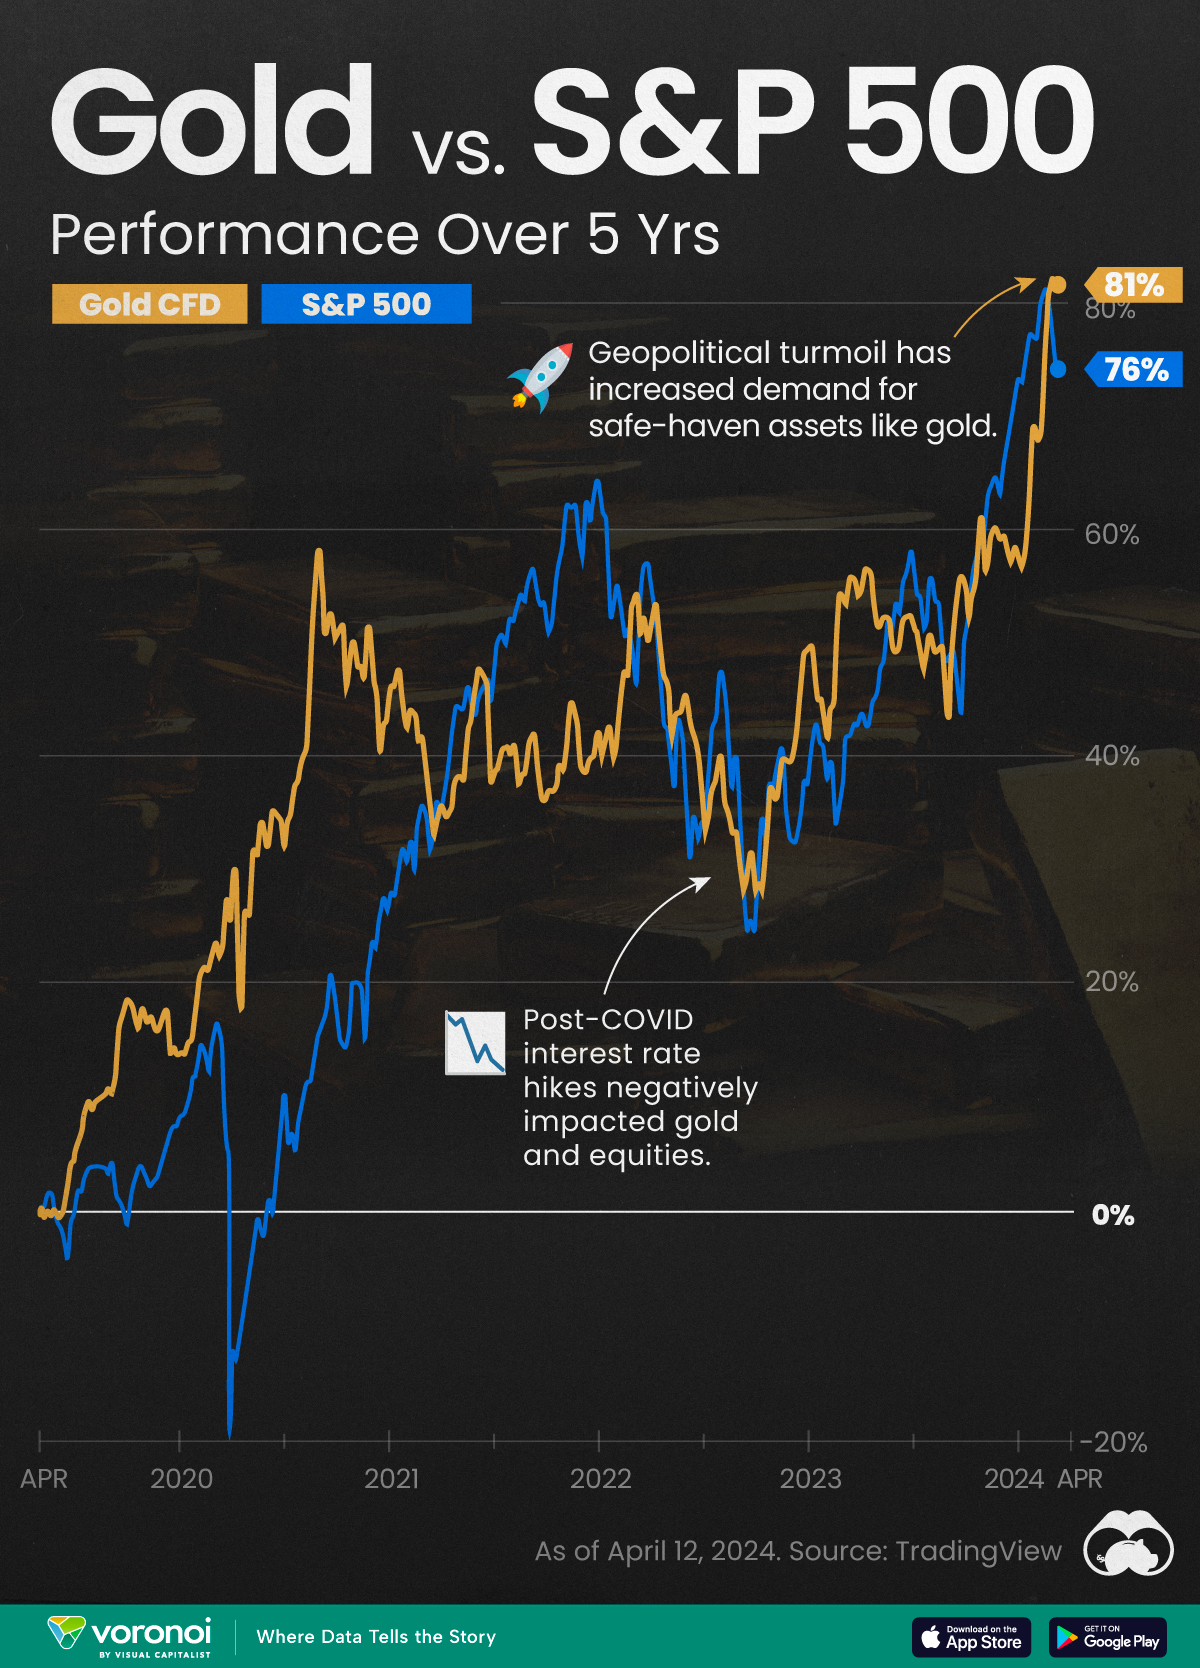 Gold vs. S&P 500: Which Has Grown More Over Five Years?